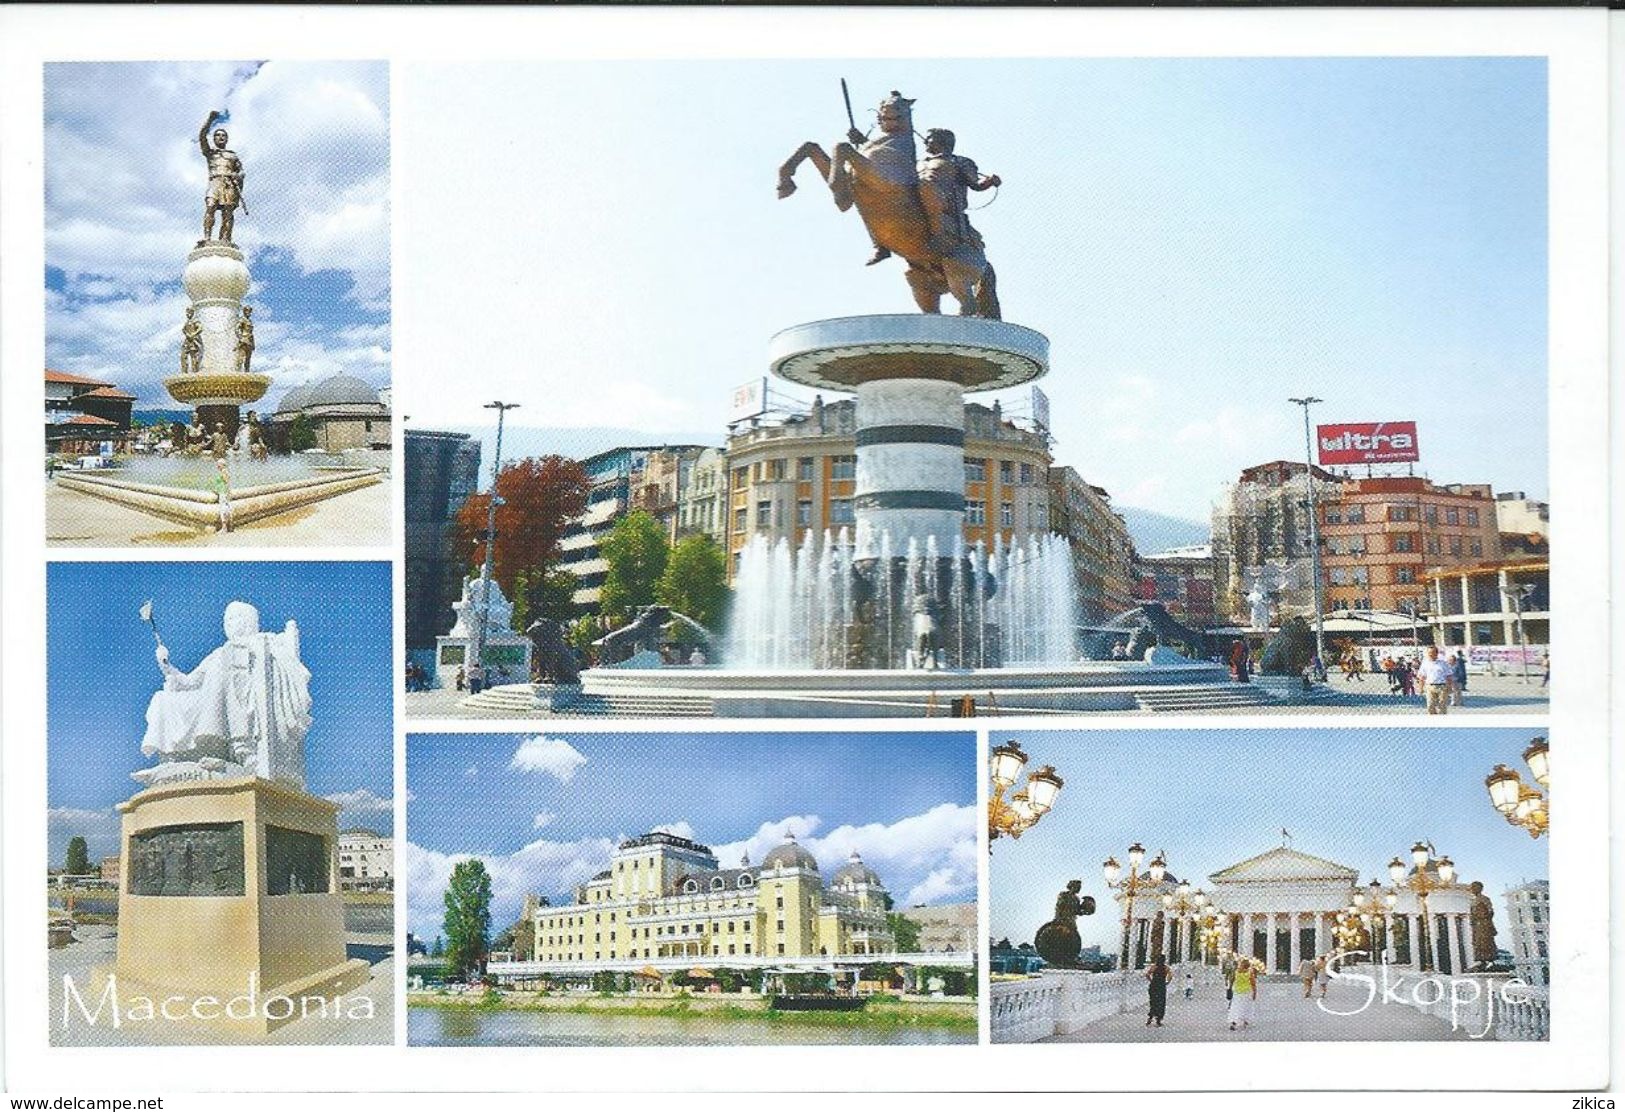 Macedonia Skopje.Fountain - Alexander The Great.horse And Monuments. UNUSED POSTCARD - Macedonia Del Nord